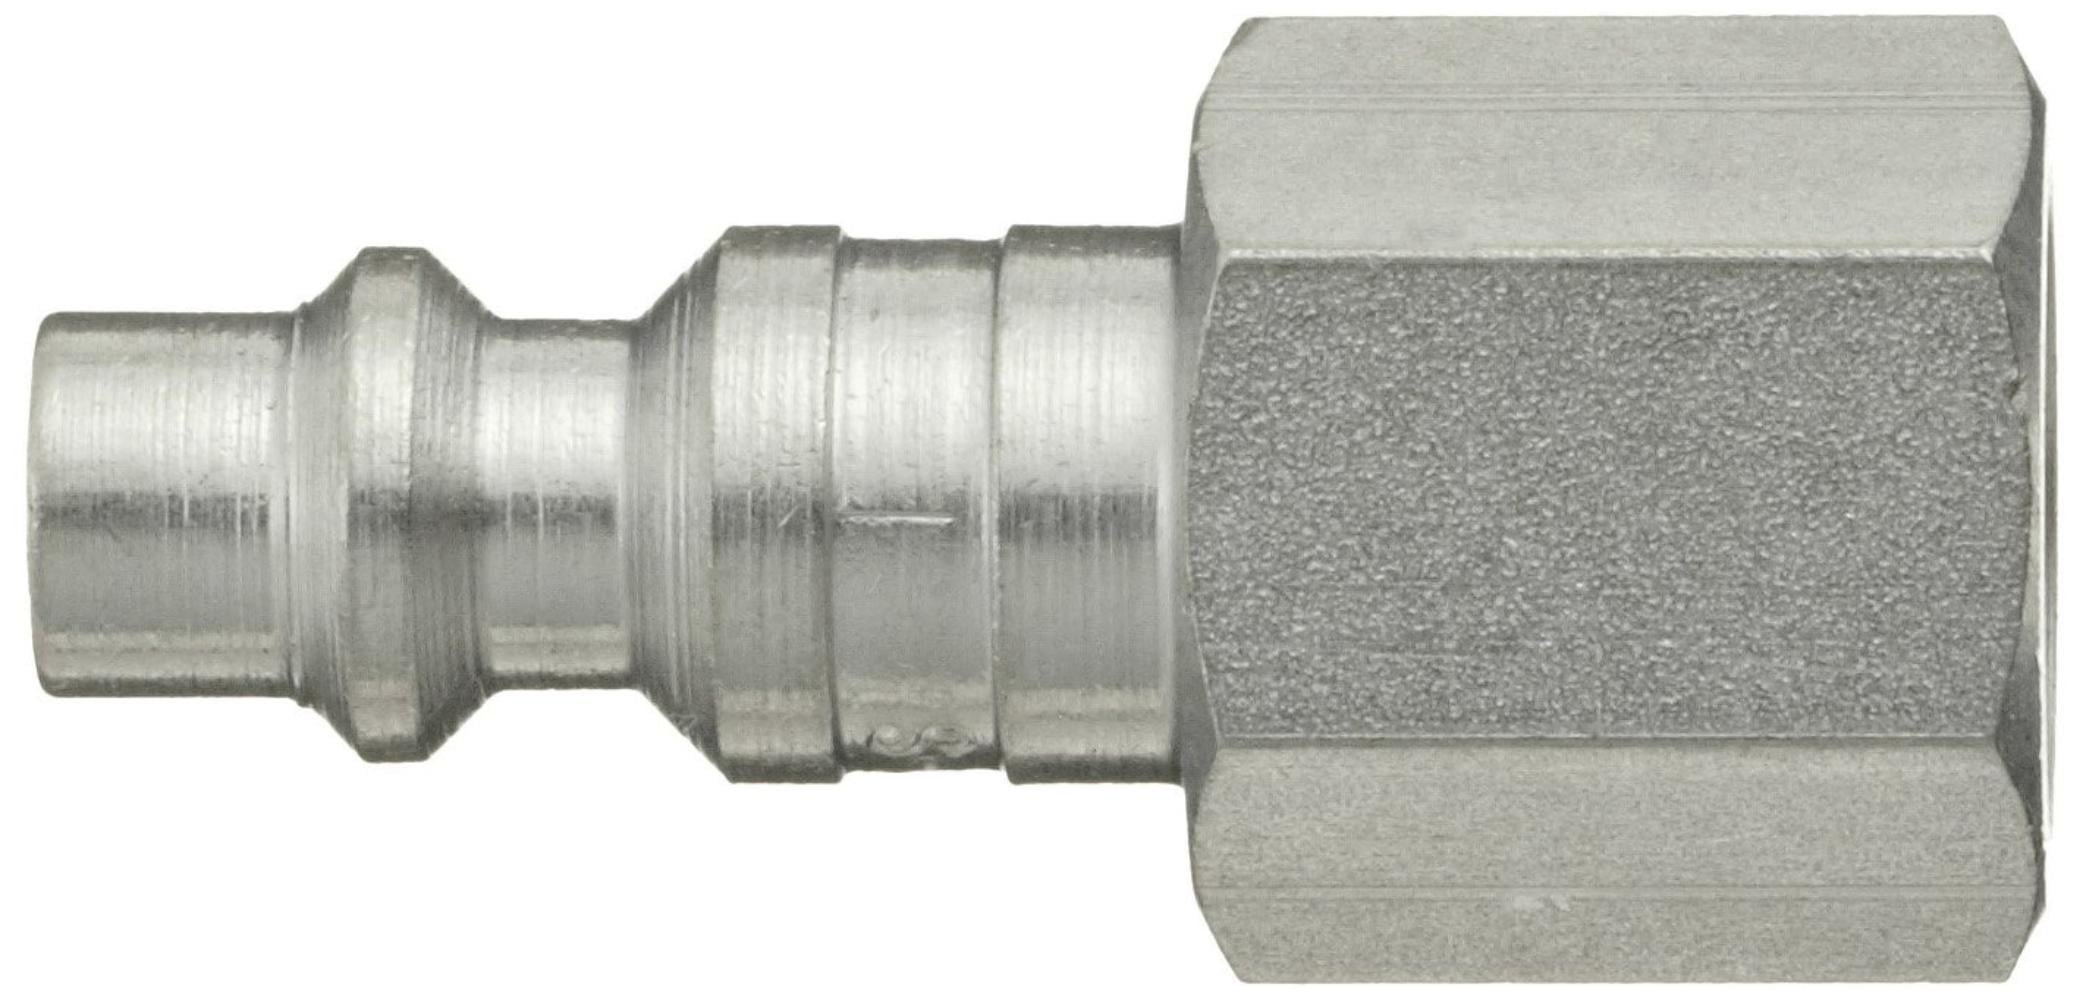 1/4 Coupling x 1/4 NPT Female Dixon DC20S Stainless Steel 303 Air Chief Industrial Interchange Quick-Connect Hose Fitting 